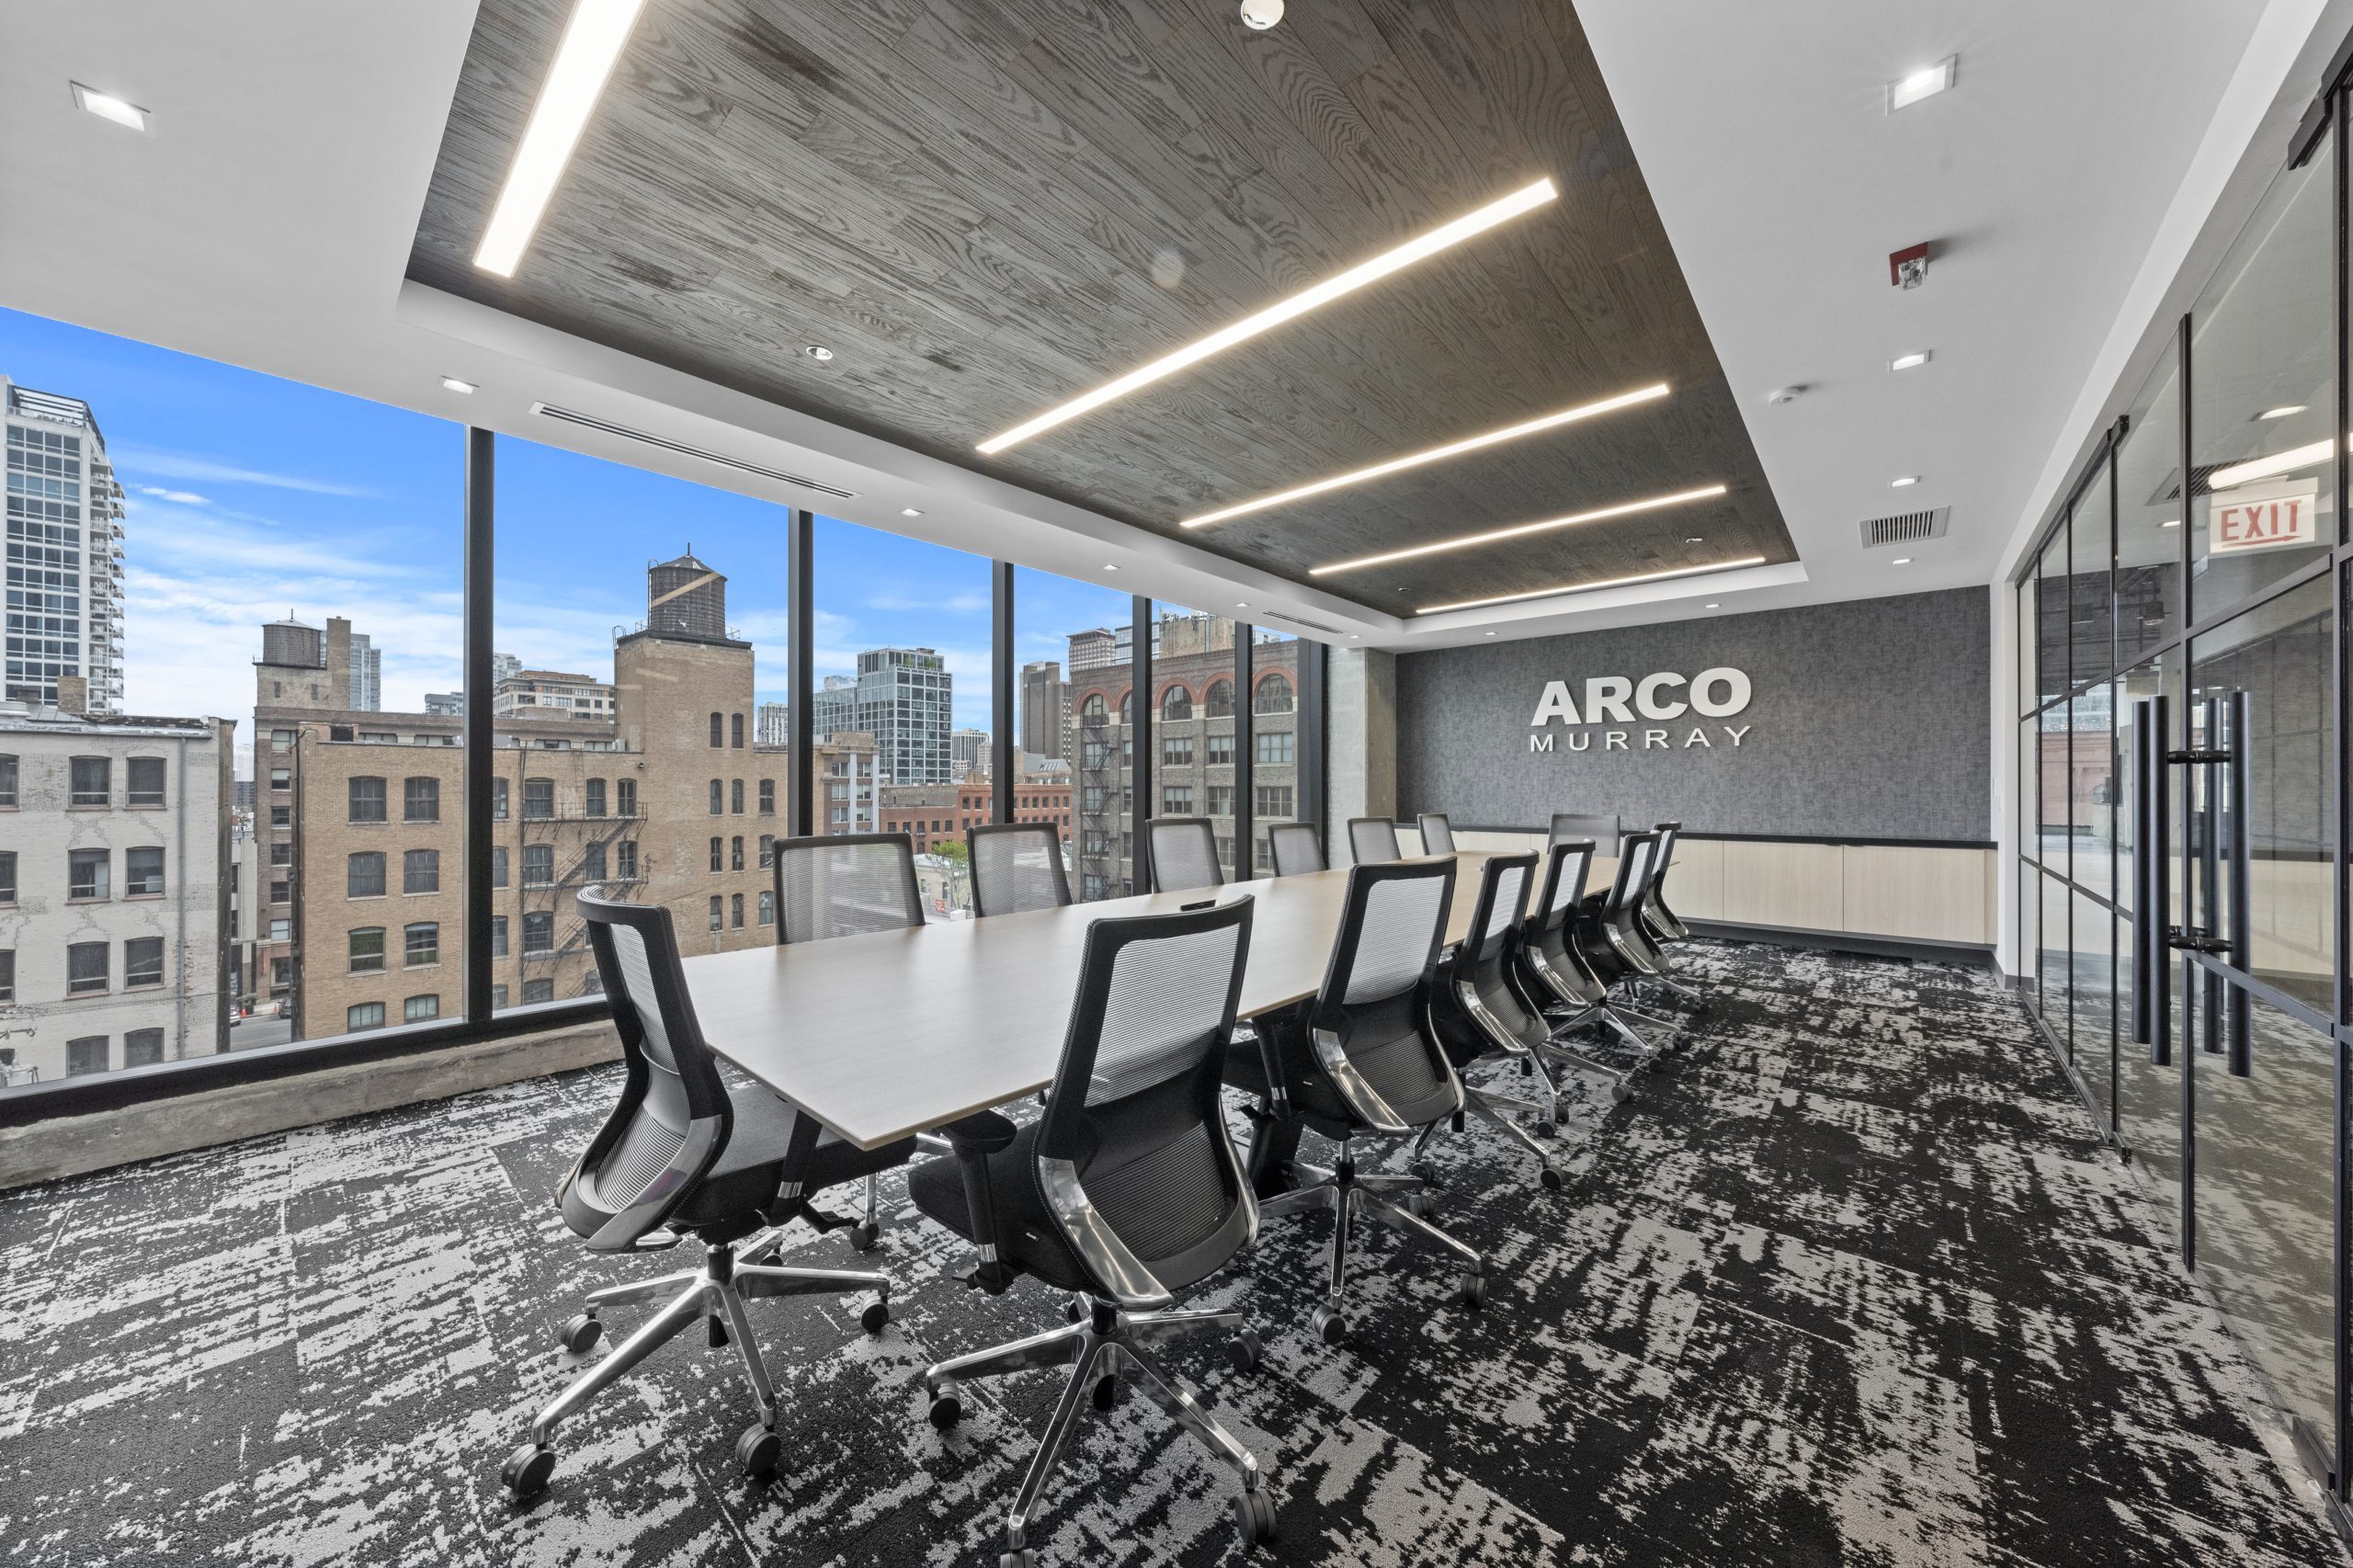 ARCO/Murray Office Conference Room Inside 311 W. Huron in Chicago